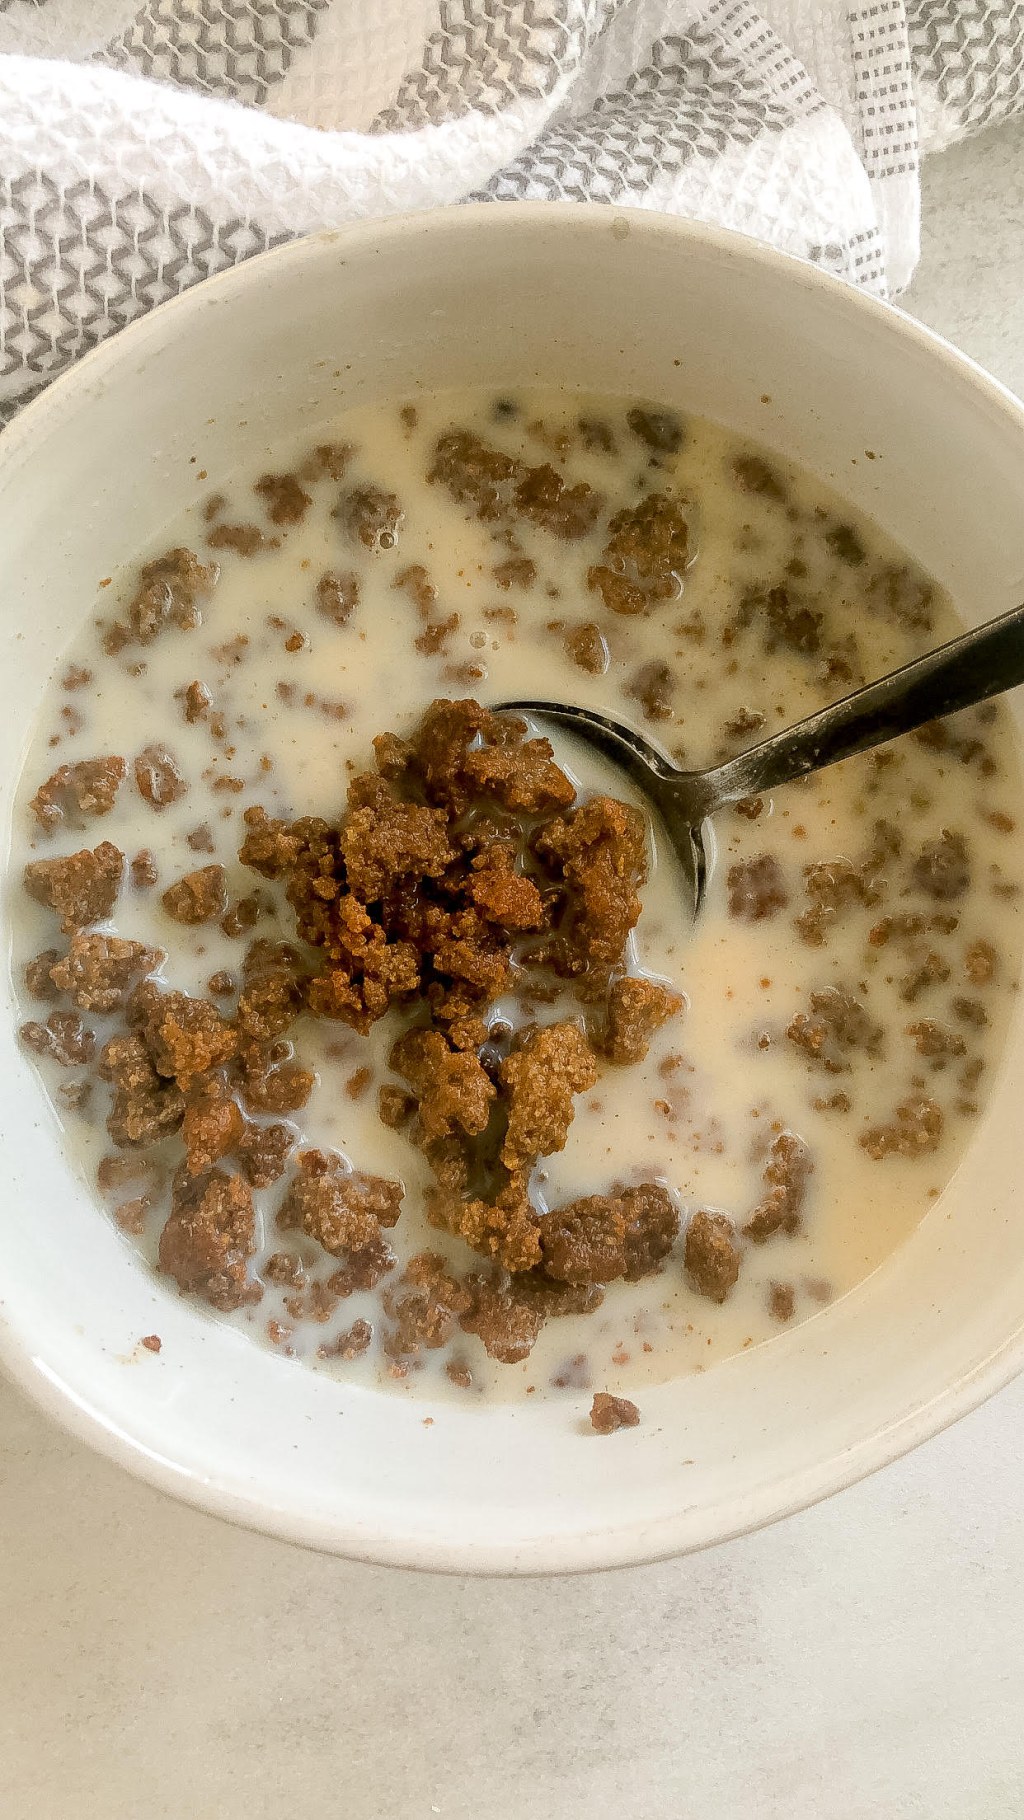 Picture of: Animal-Based “Cereal”